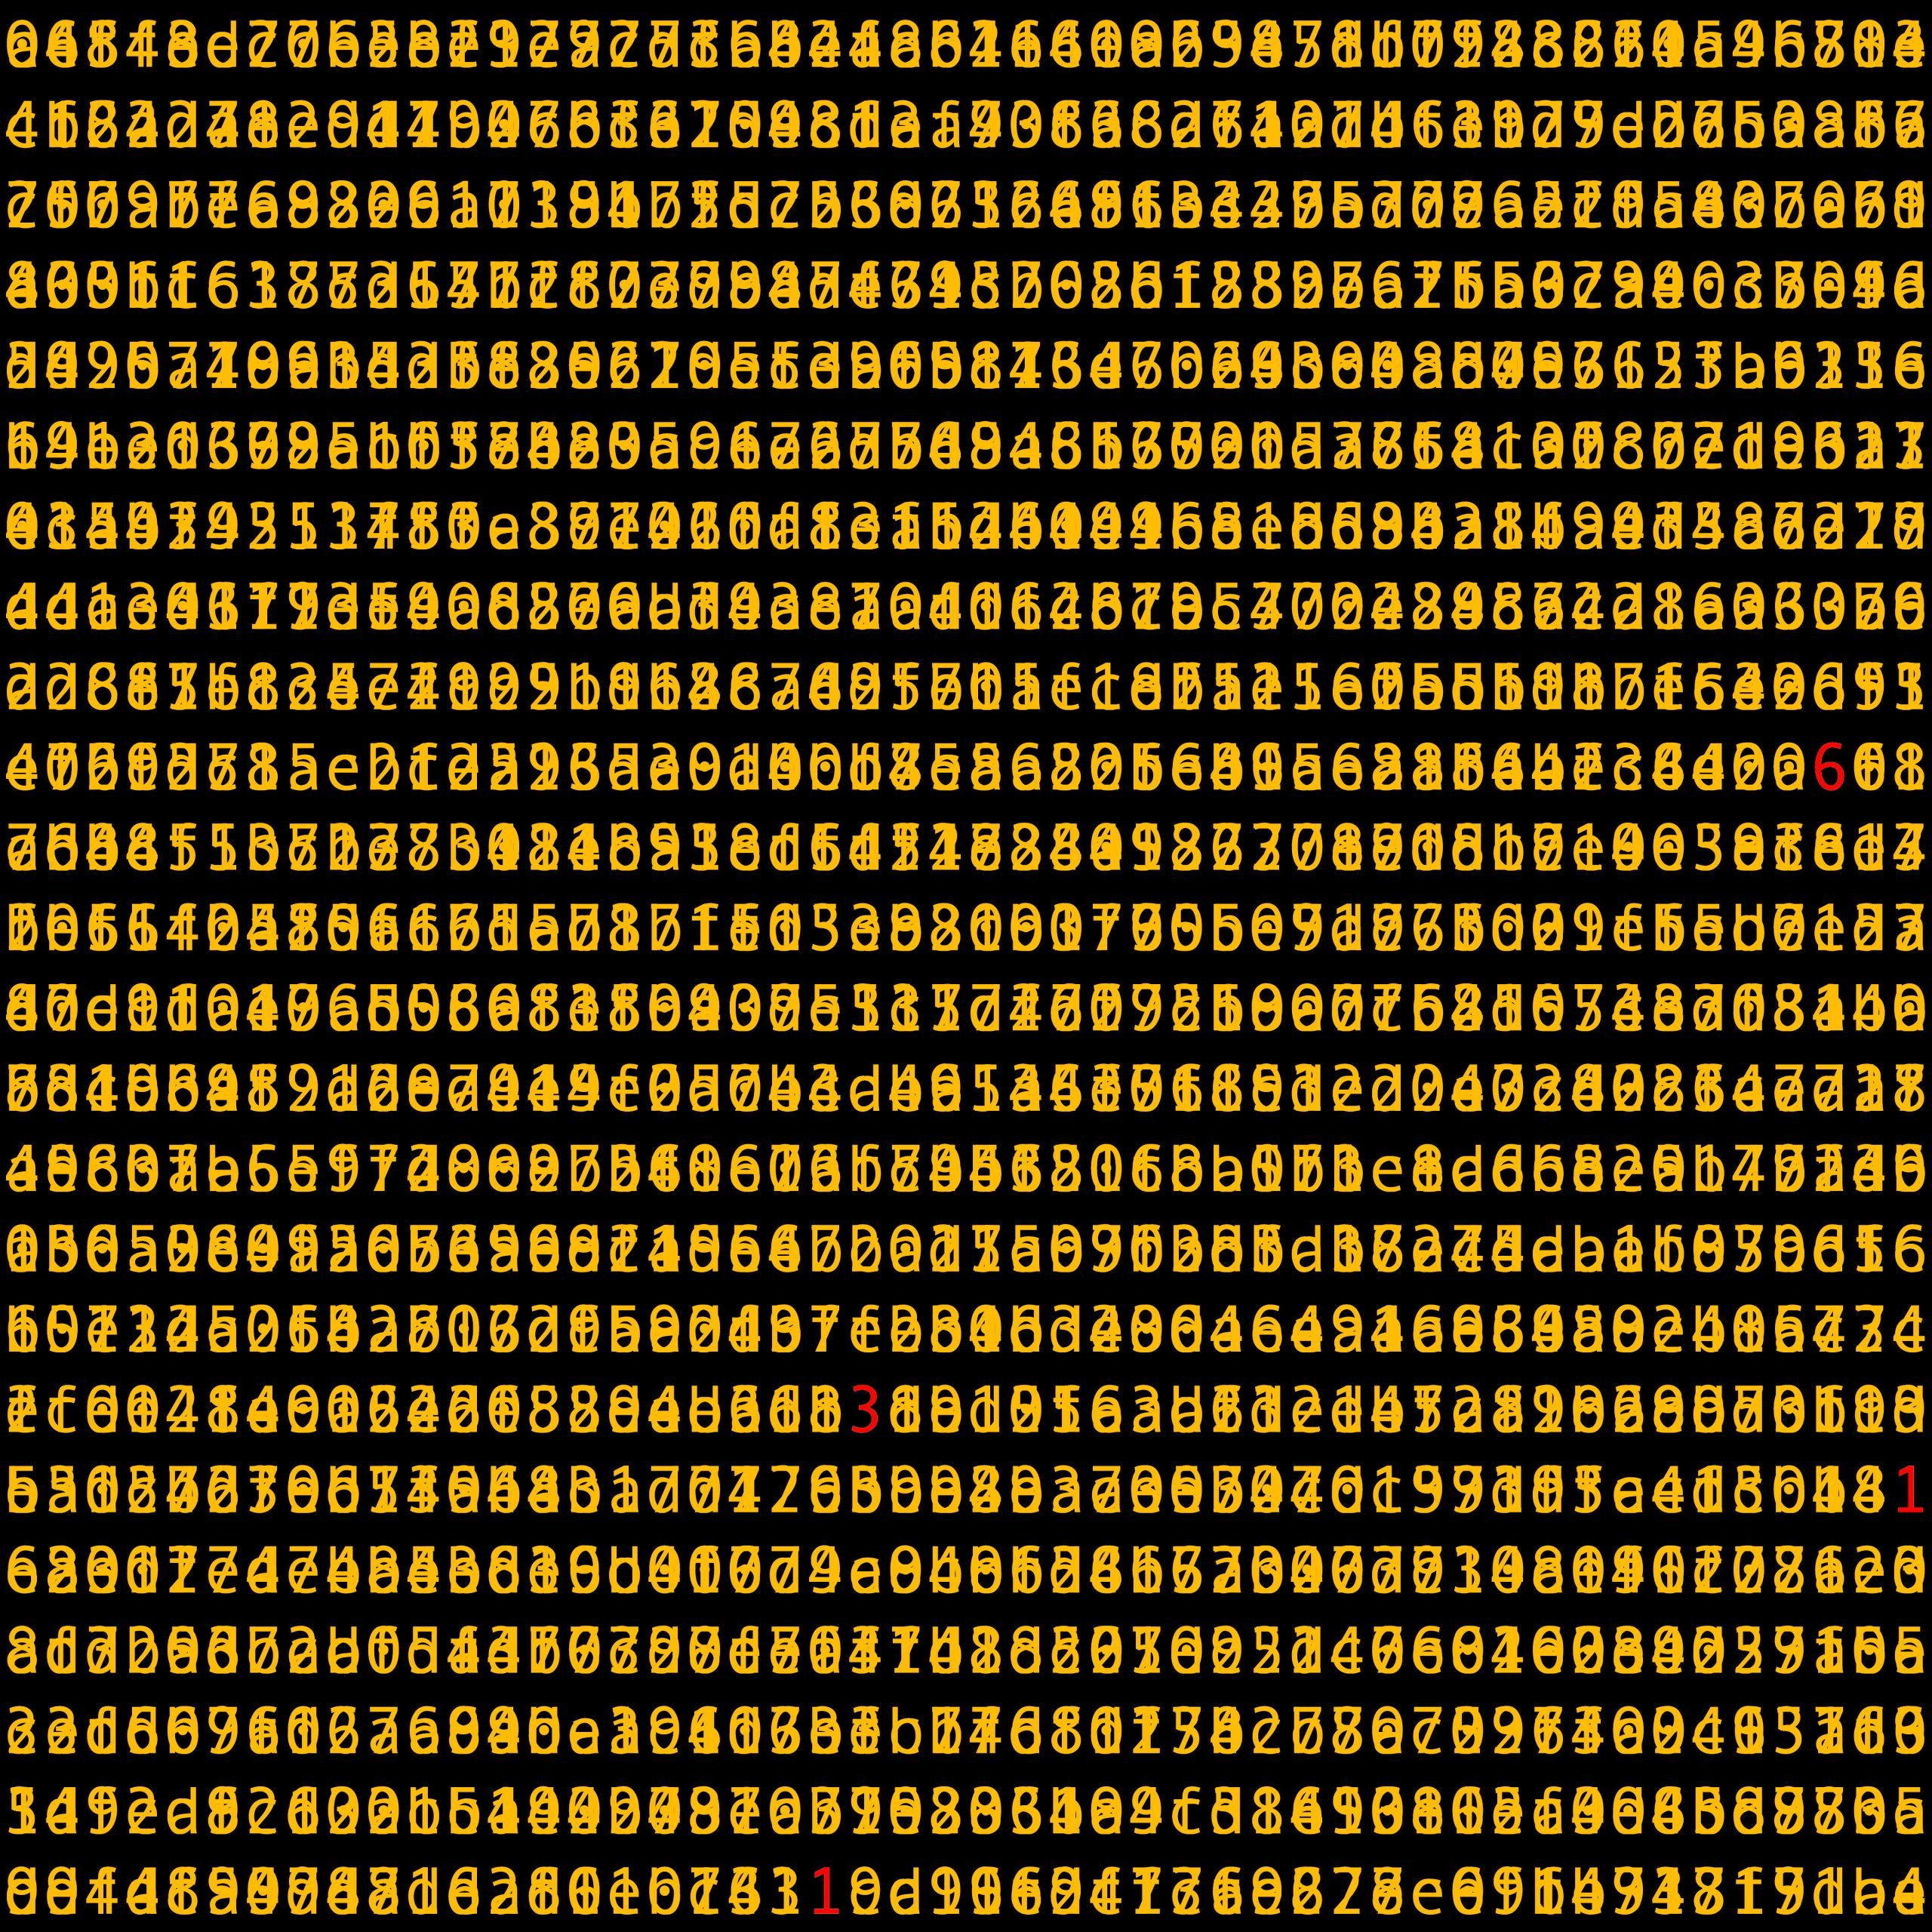 yellow characters on a black background inone of the 1111 NFTs by Kevin Absoch that are keeping their value